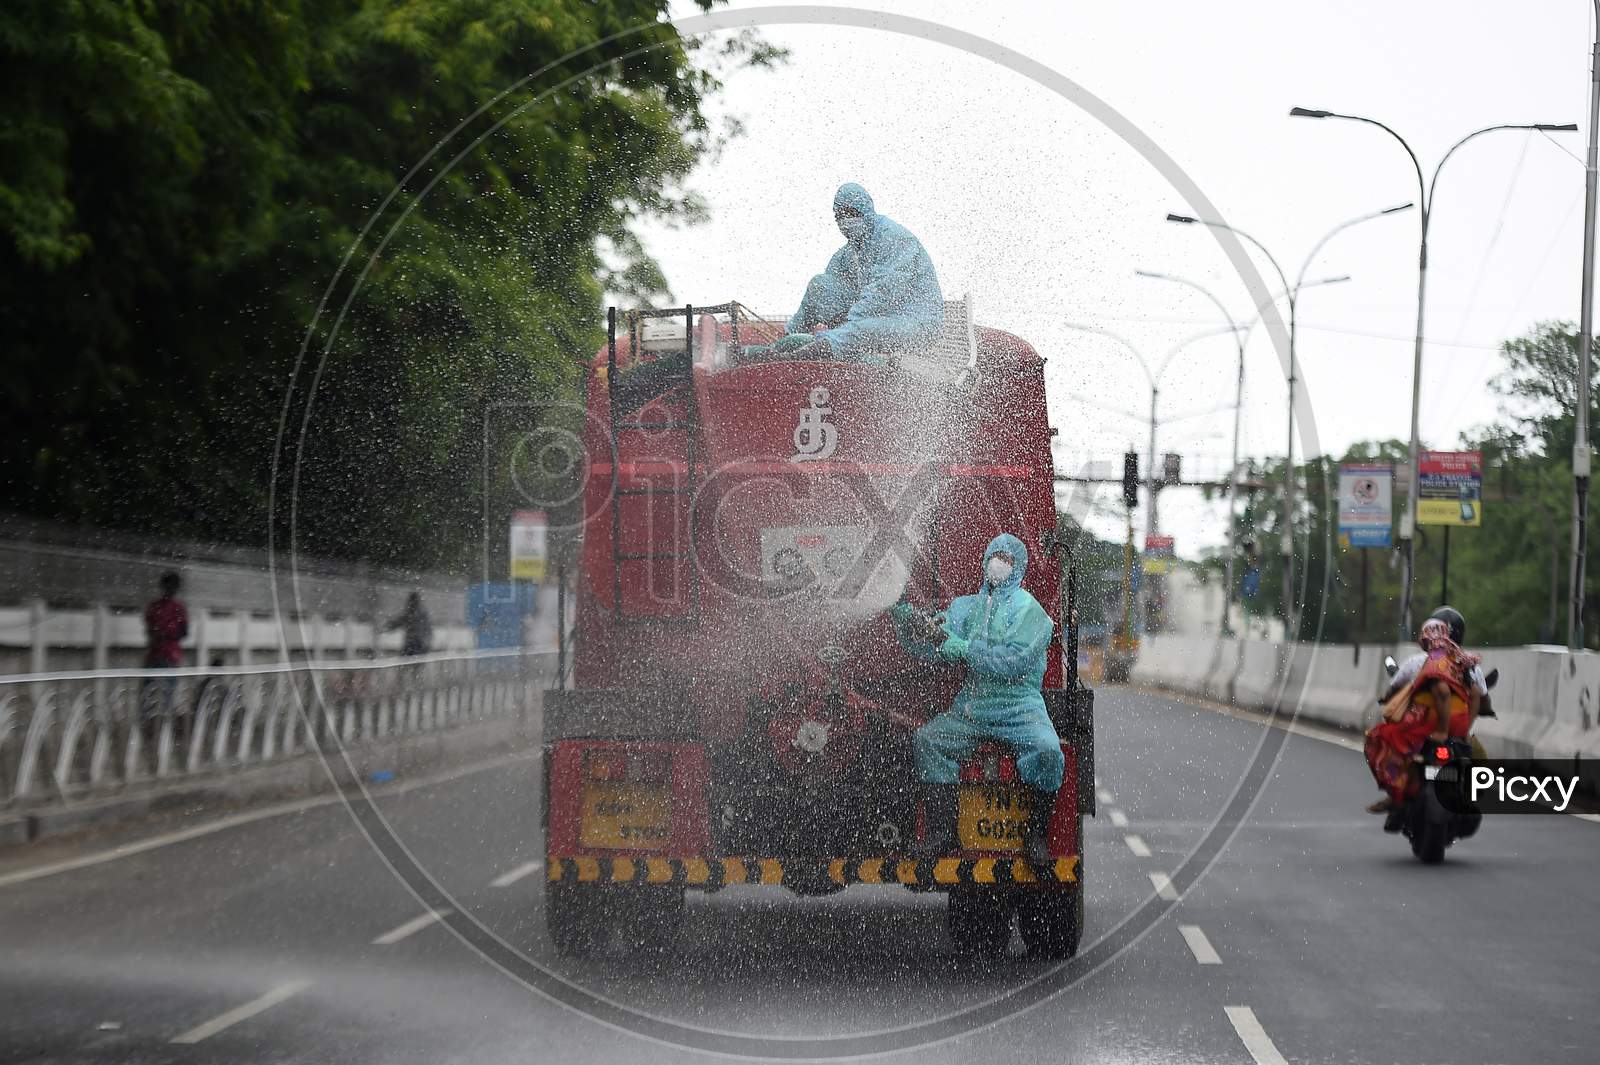 Firefighters spraying disinfectant in a containment zone as a preventive measure to contain the spread of Coronavirus in Chennai.